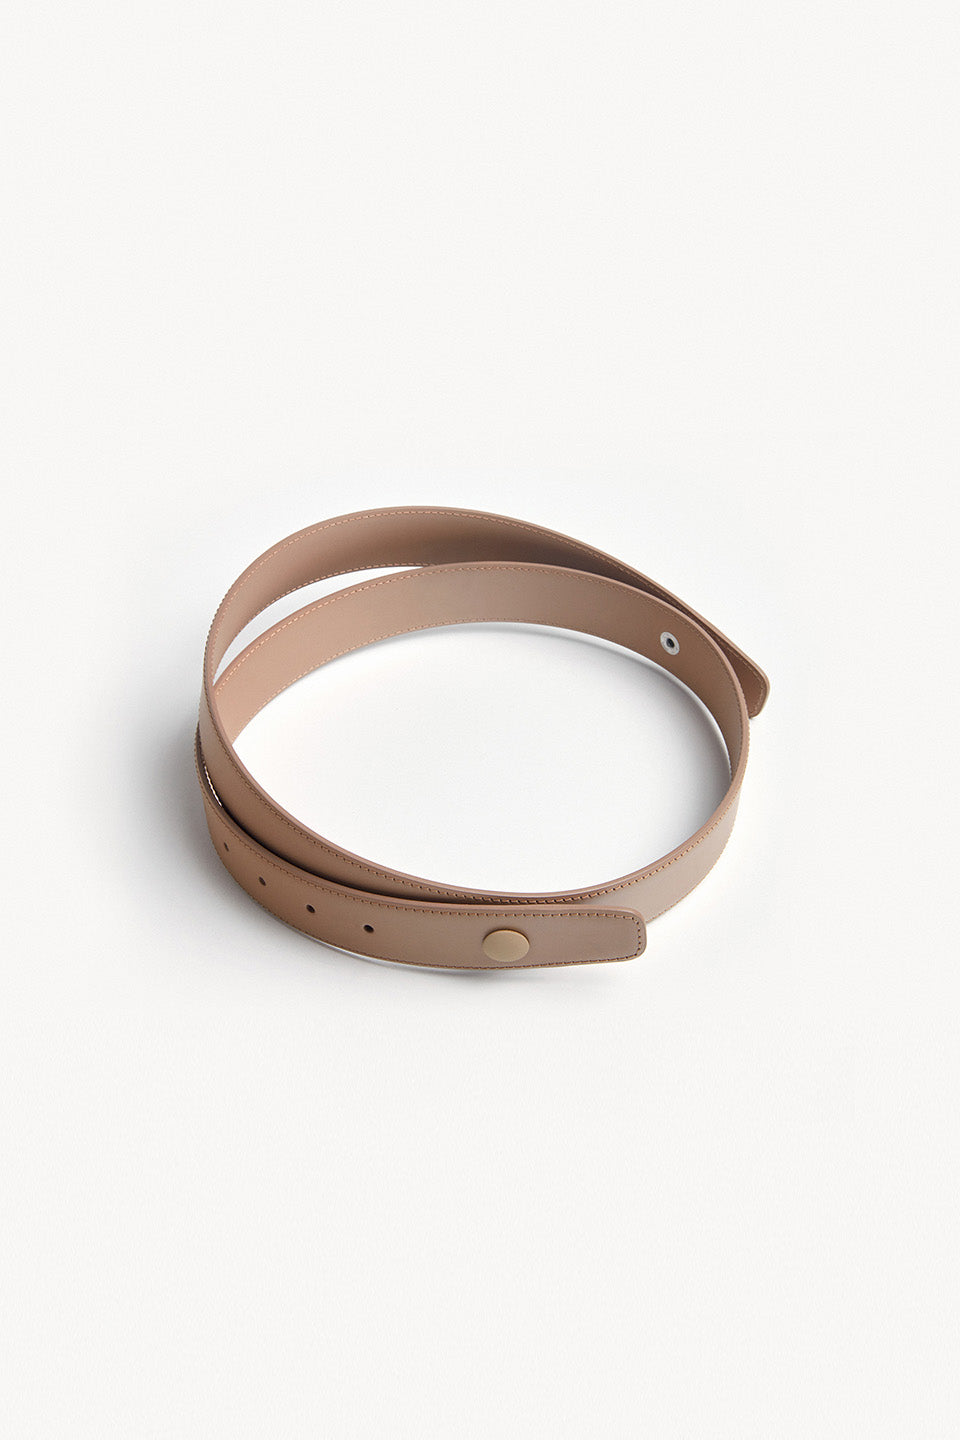 Wrap Around Leather Belt in Nude